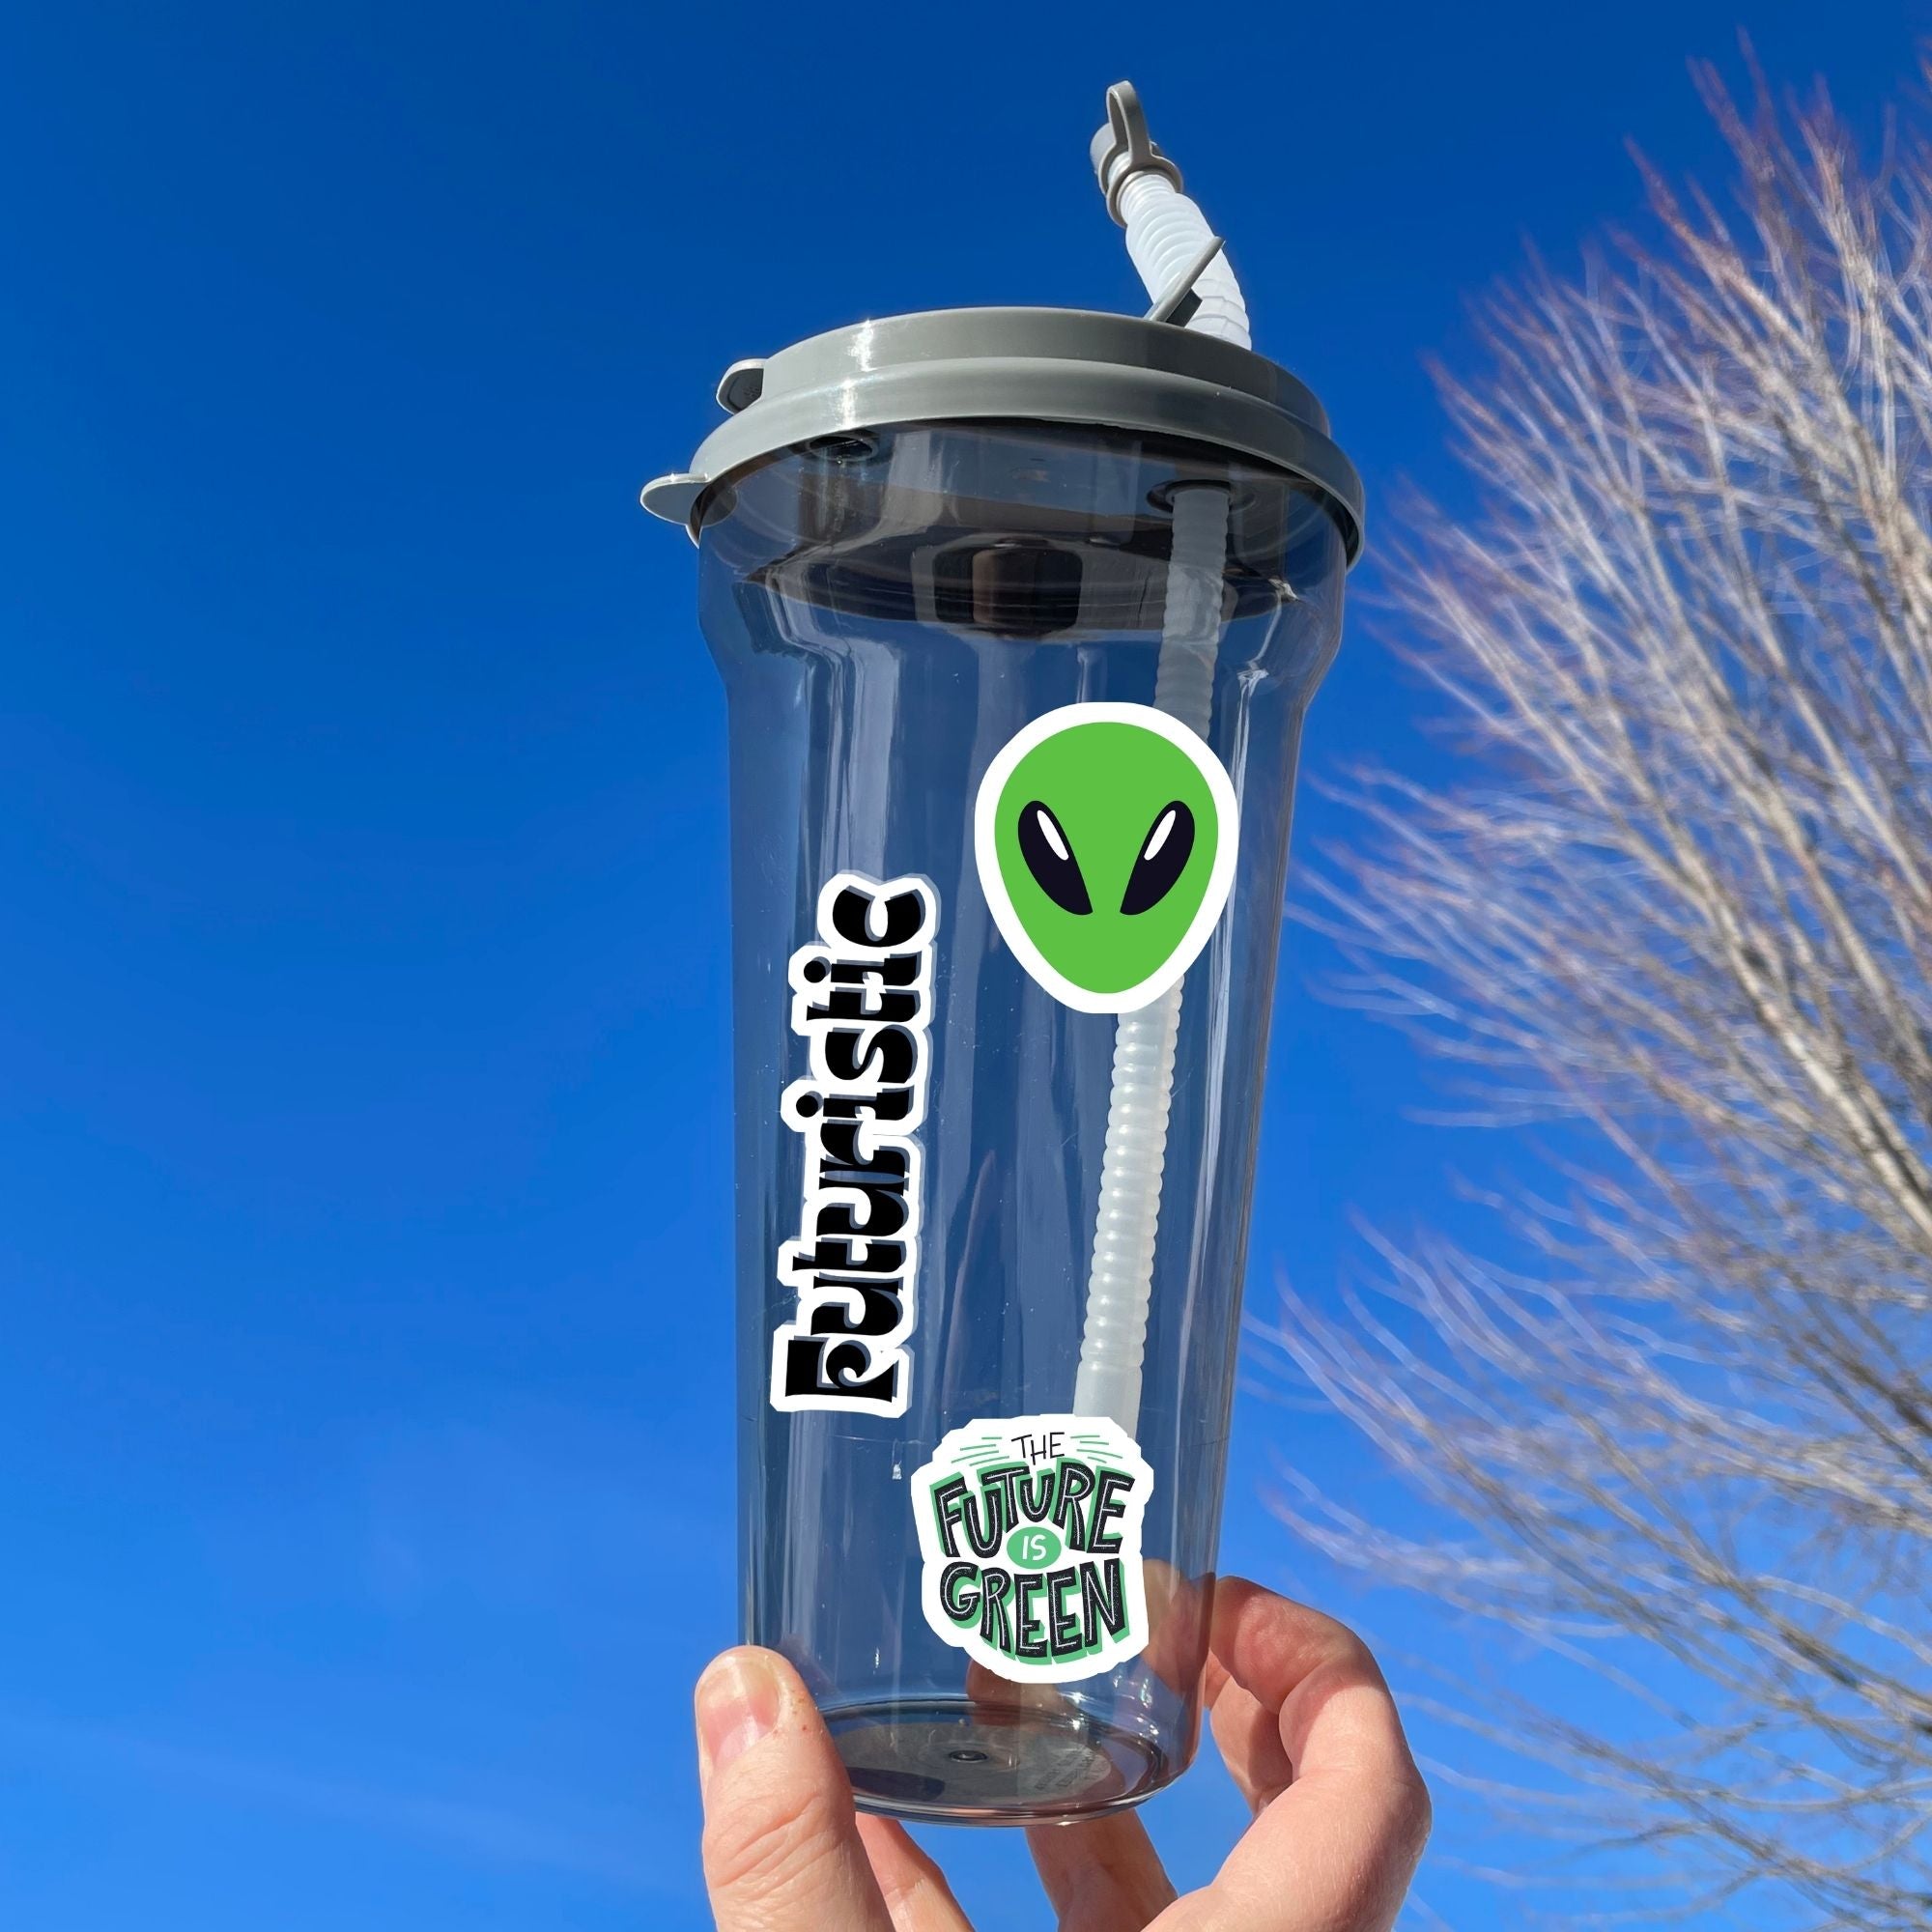 Set on a background of a circuit board, this sticker sheet is filled with futuristic sticker images like rocket ships, flying cars, aliens, and robots, and it has a holographic star overlay! This image shows a water bottle with the sticker sheet header reading "Futuristic", green alien head, and "The Future is Green" stickers applied to it.